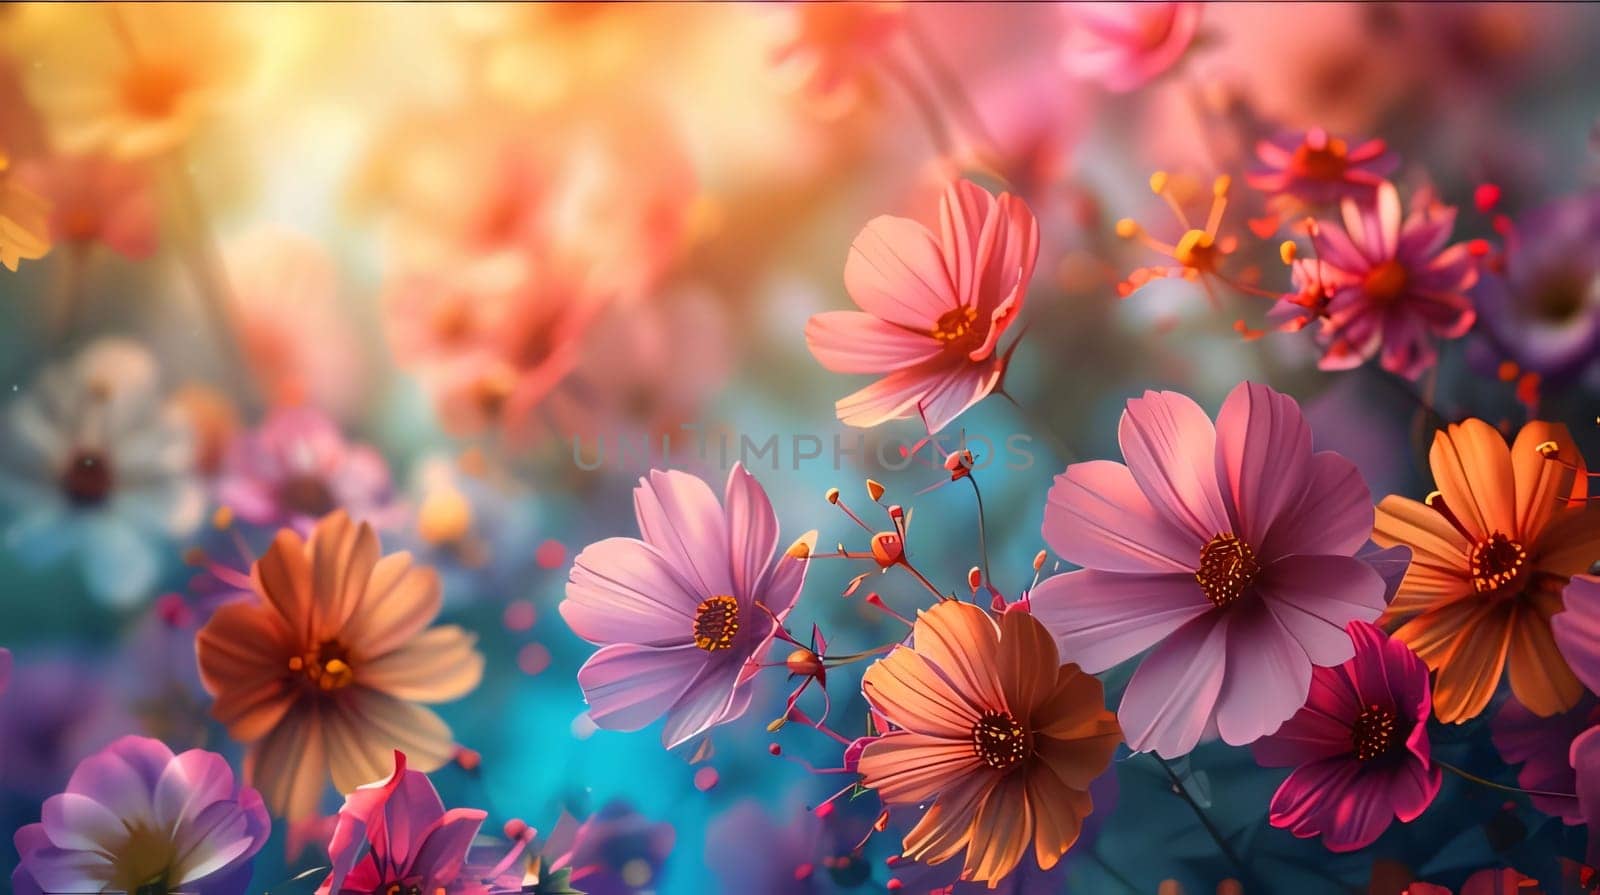 Pink and red flowers, petals on a light background, banner with space for your own content. Flowering flowers, a symbol of spring, new life. A joyful time of nature waking up to life.